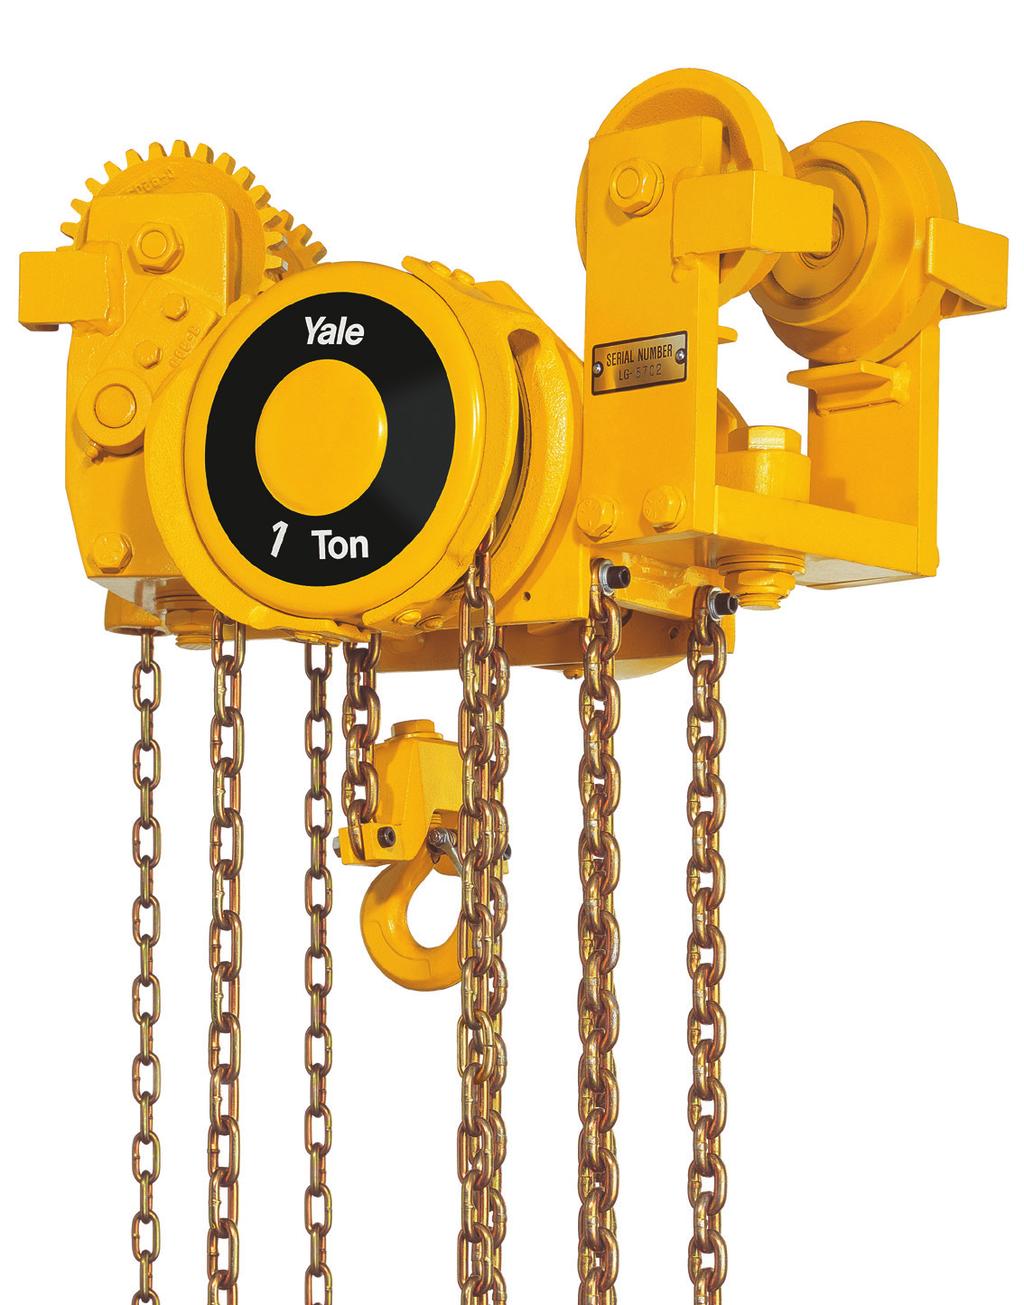 Hand wheel and gear case are positioned outside the reach of the bottom flange, thus allowing the bottom block to be raised almost until the underside of the beam.